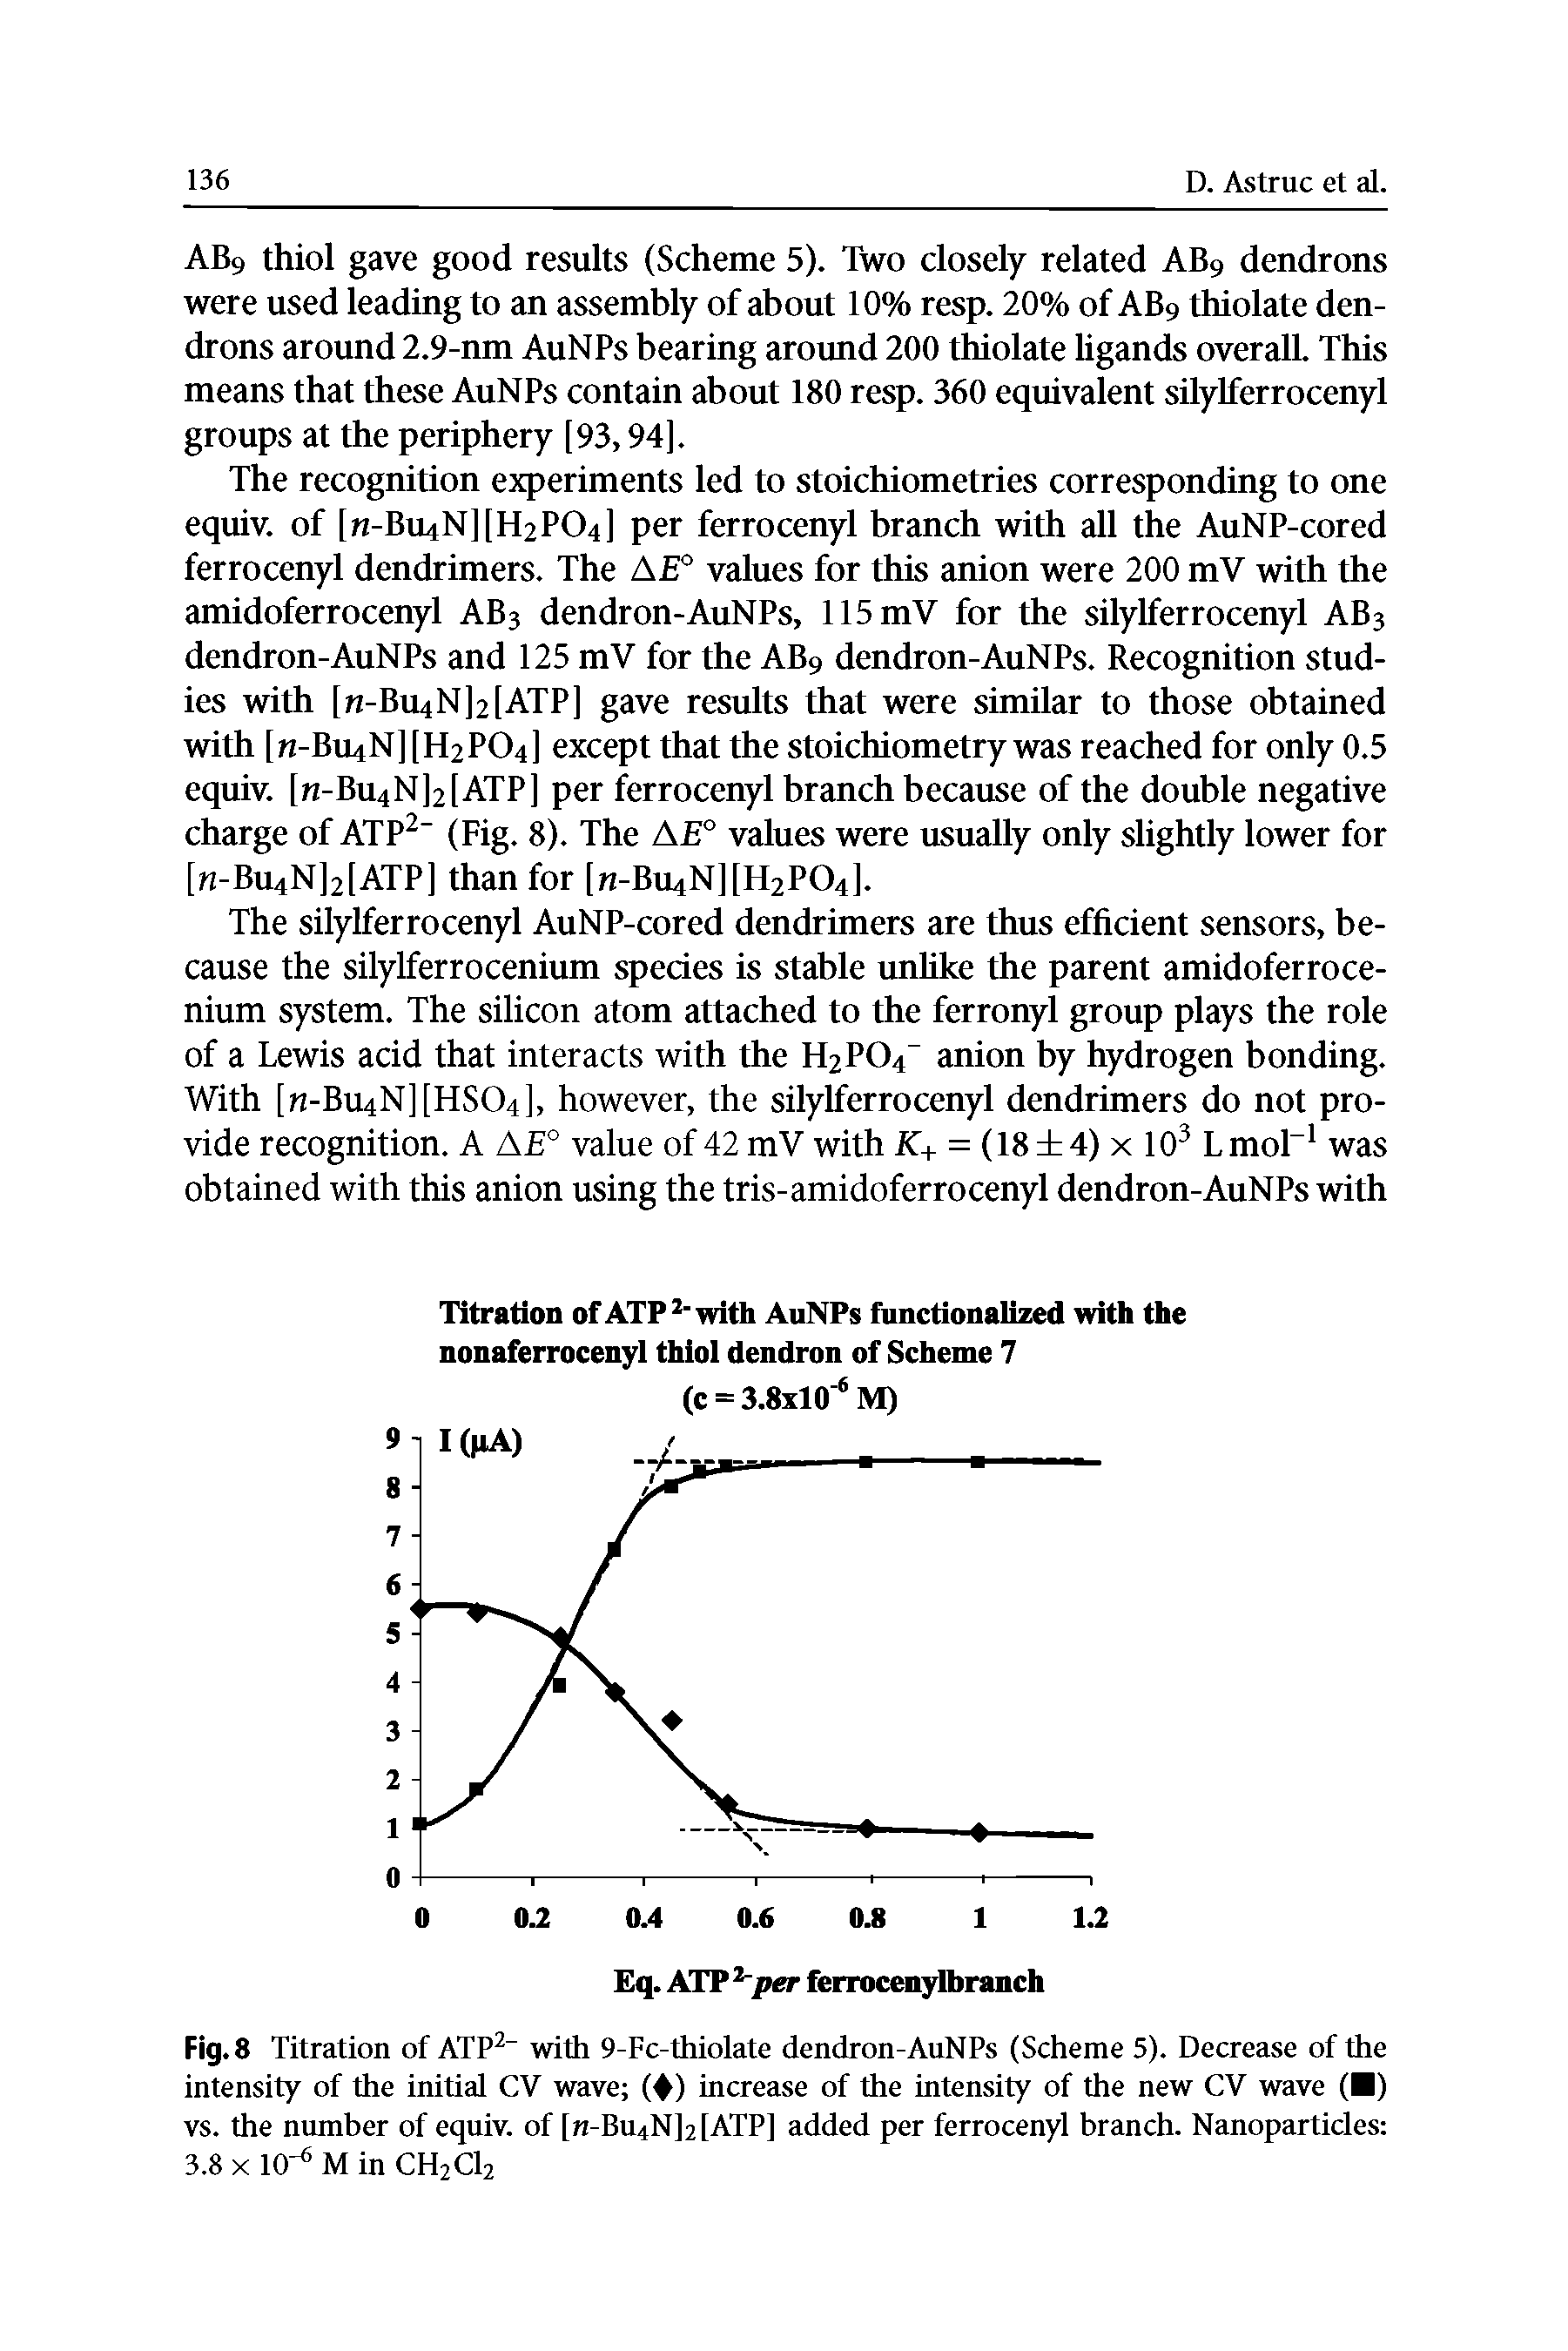 Fig. 8 Titration of ATP2- with 9-Fc-thiolate dendron-AuNPs (Scheme 5). Decrease of the intensity of the initial CV wave ( ) increase of the intensity of the new CV wave ( ) vs. the number of equiv. of [m-Bu4N]2[ATP] added per ferrocenyl branch. Nanoparticles 3.8 x 10 M in CH2C12...